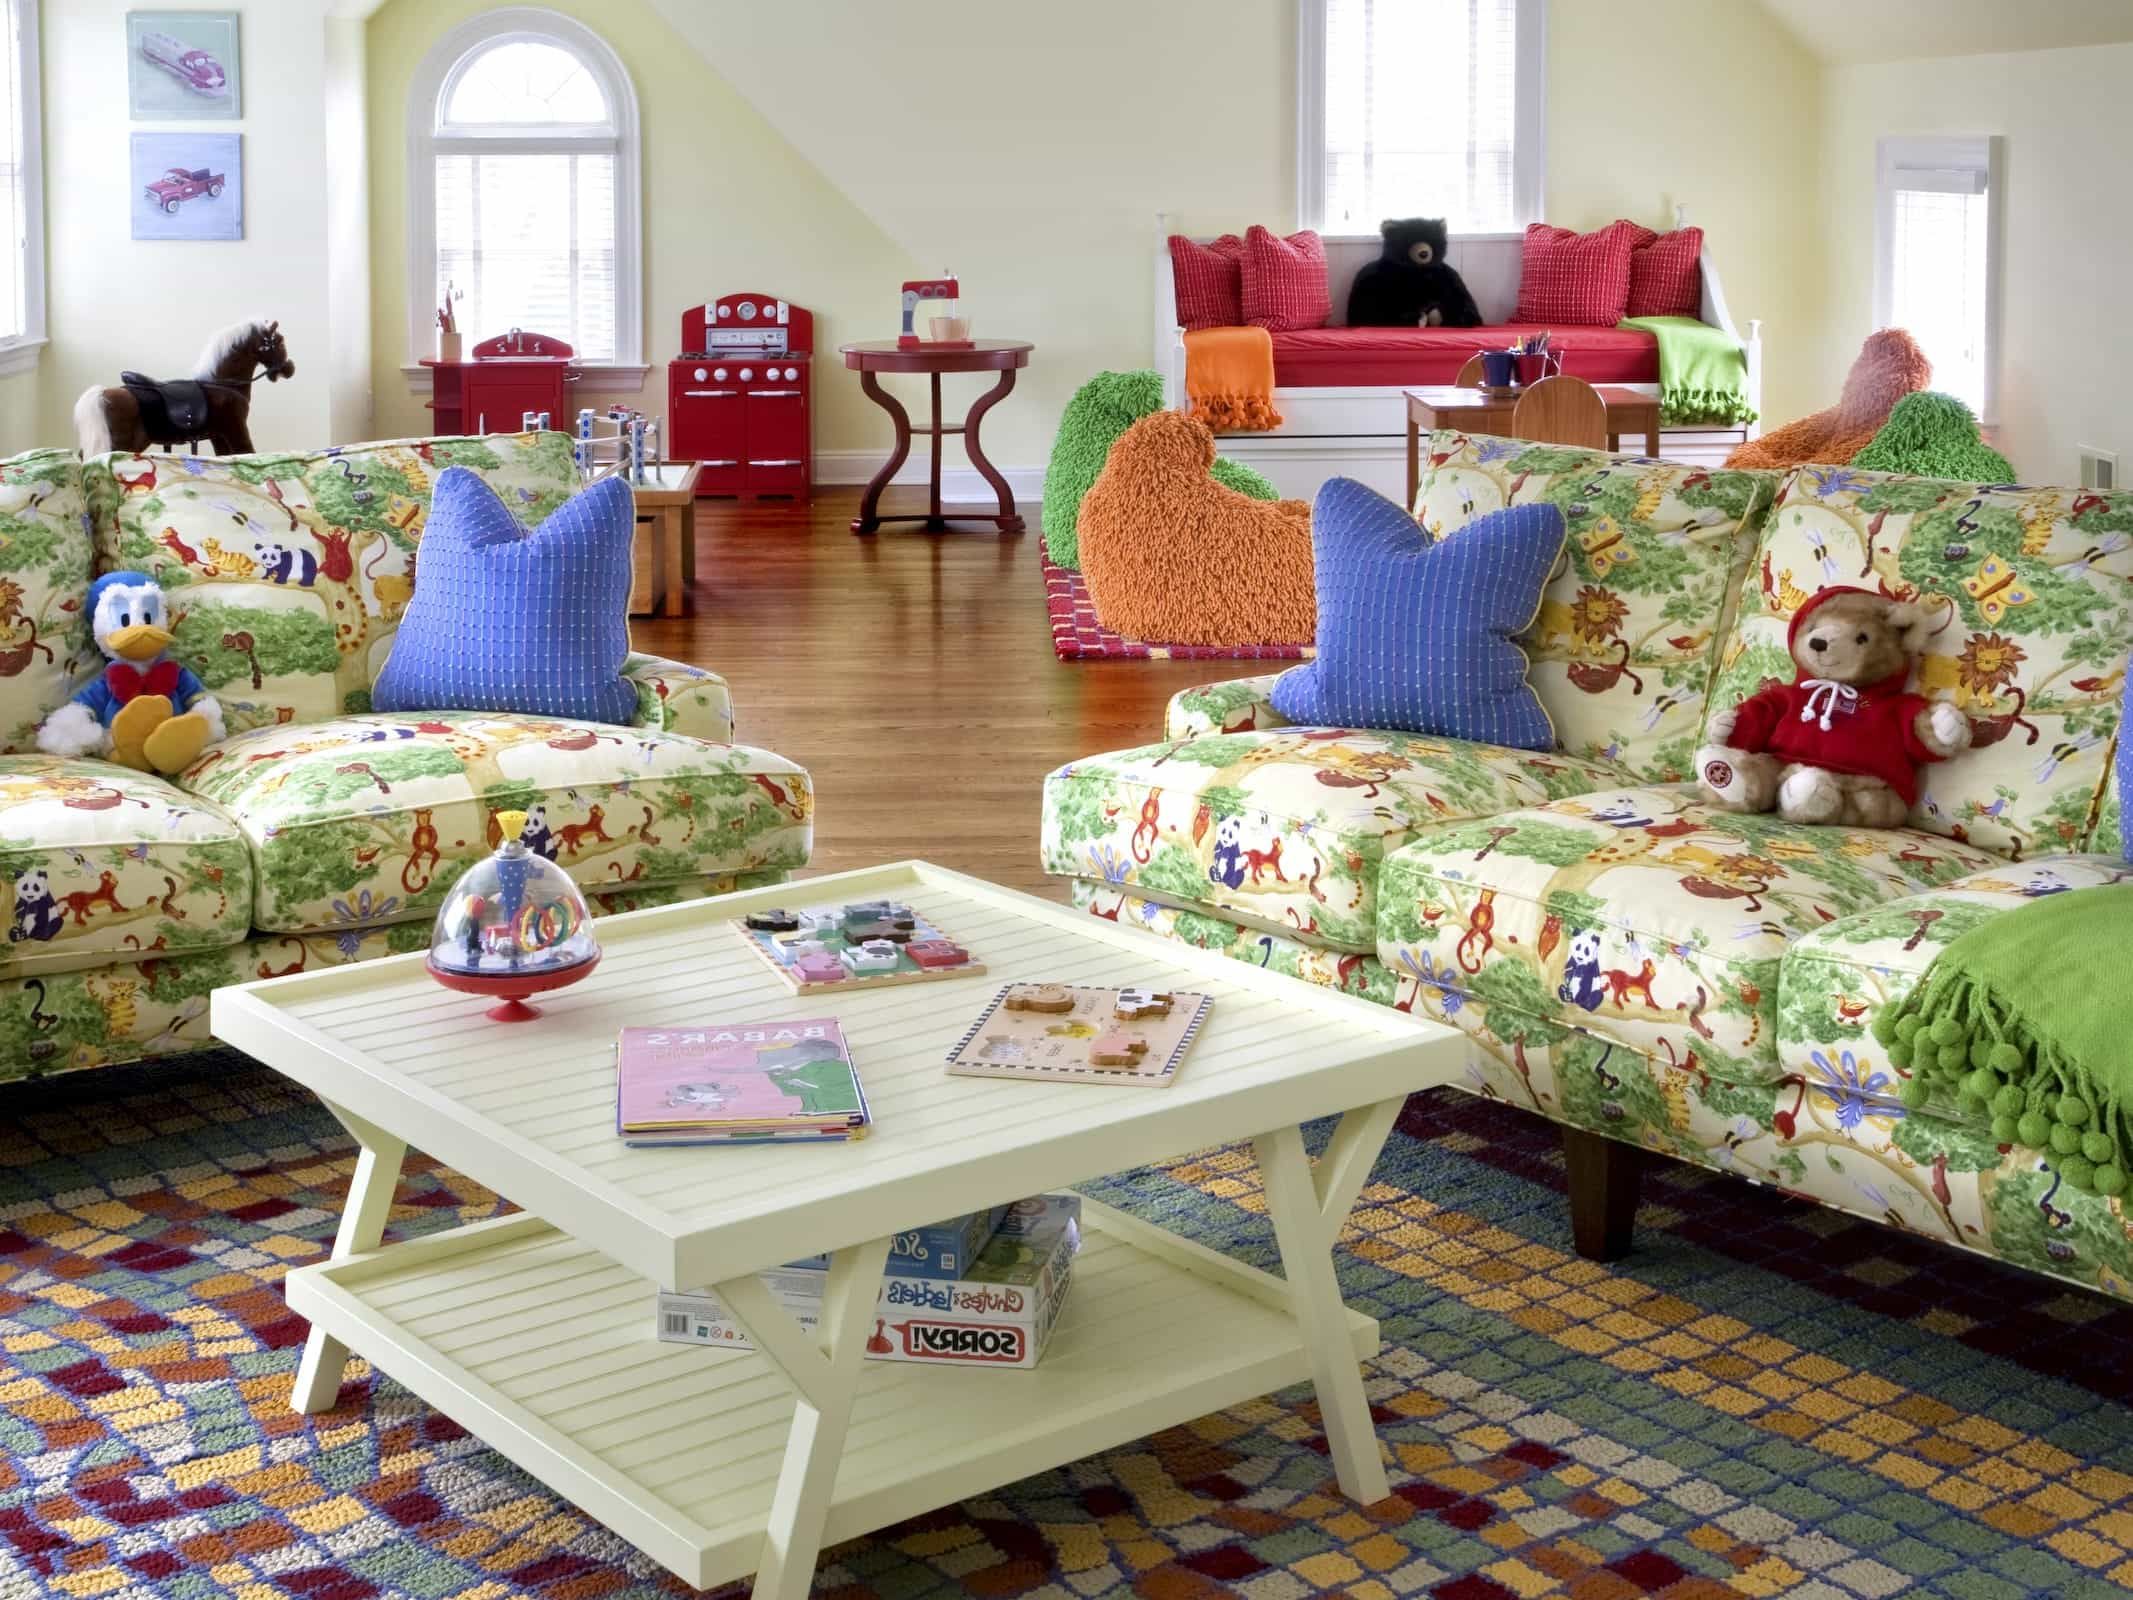 Featured Photo of Floral Patterned Sofa for Colorful Playroom Decor